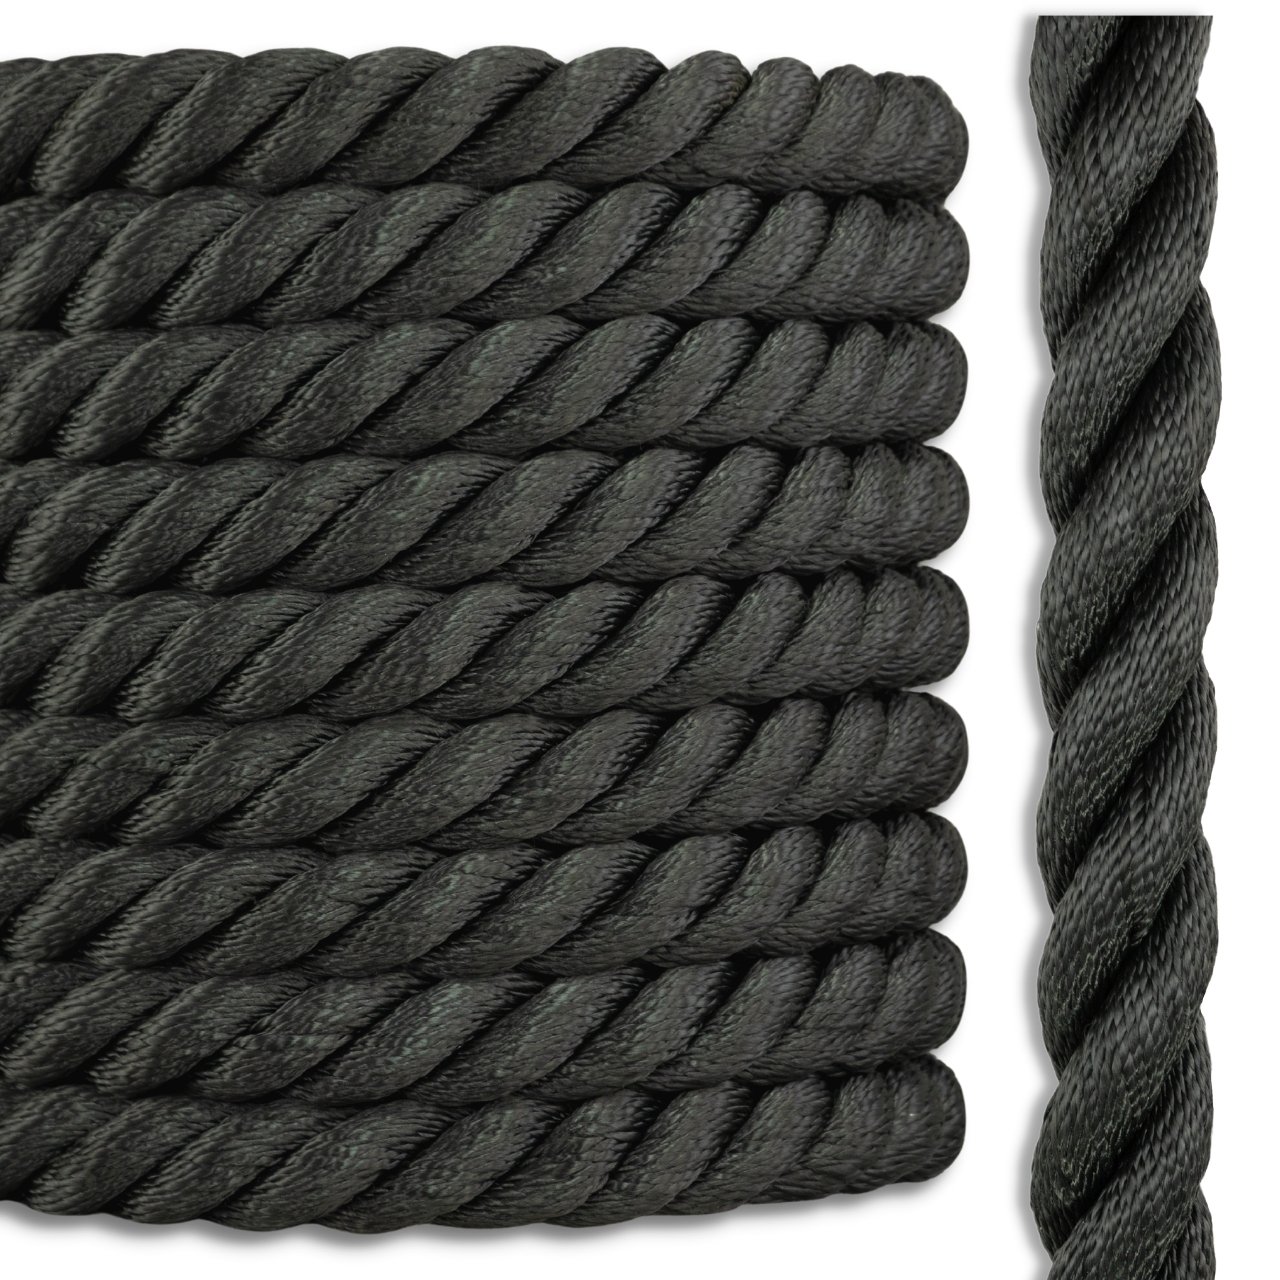 BODY SPORT TRAINING ROPE, 15' LONG, 2 DIAMETER, BLACK POLYPROPYLENE ROPE  WITH BLACK HANDLE, D-RING ATTACHED